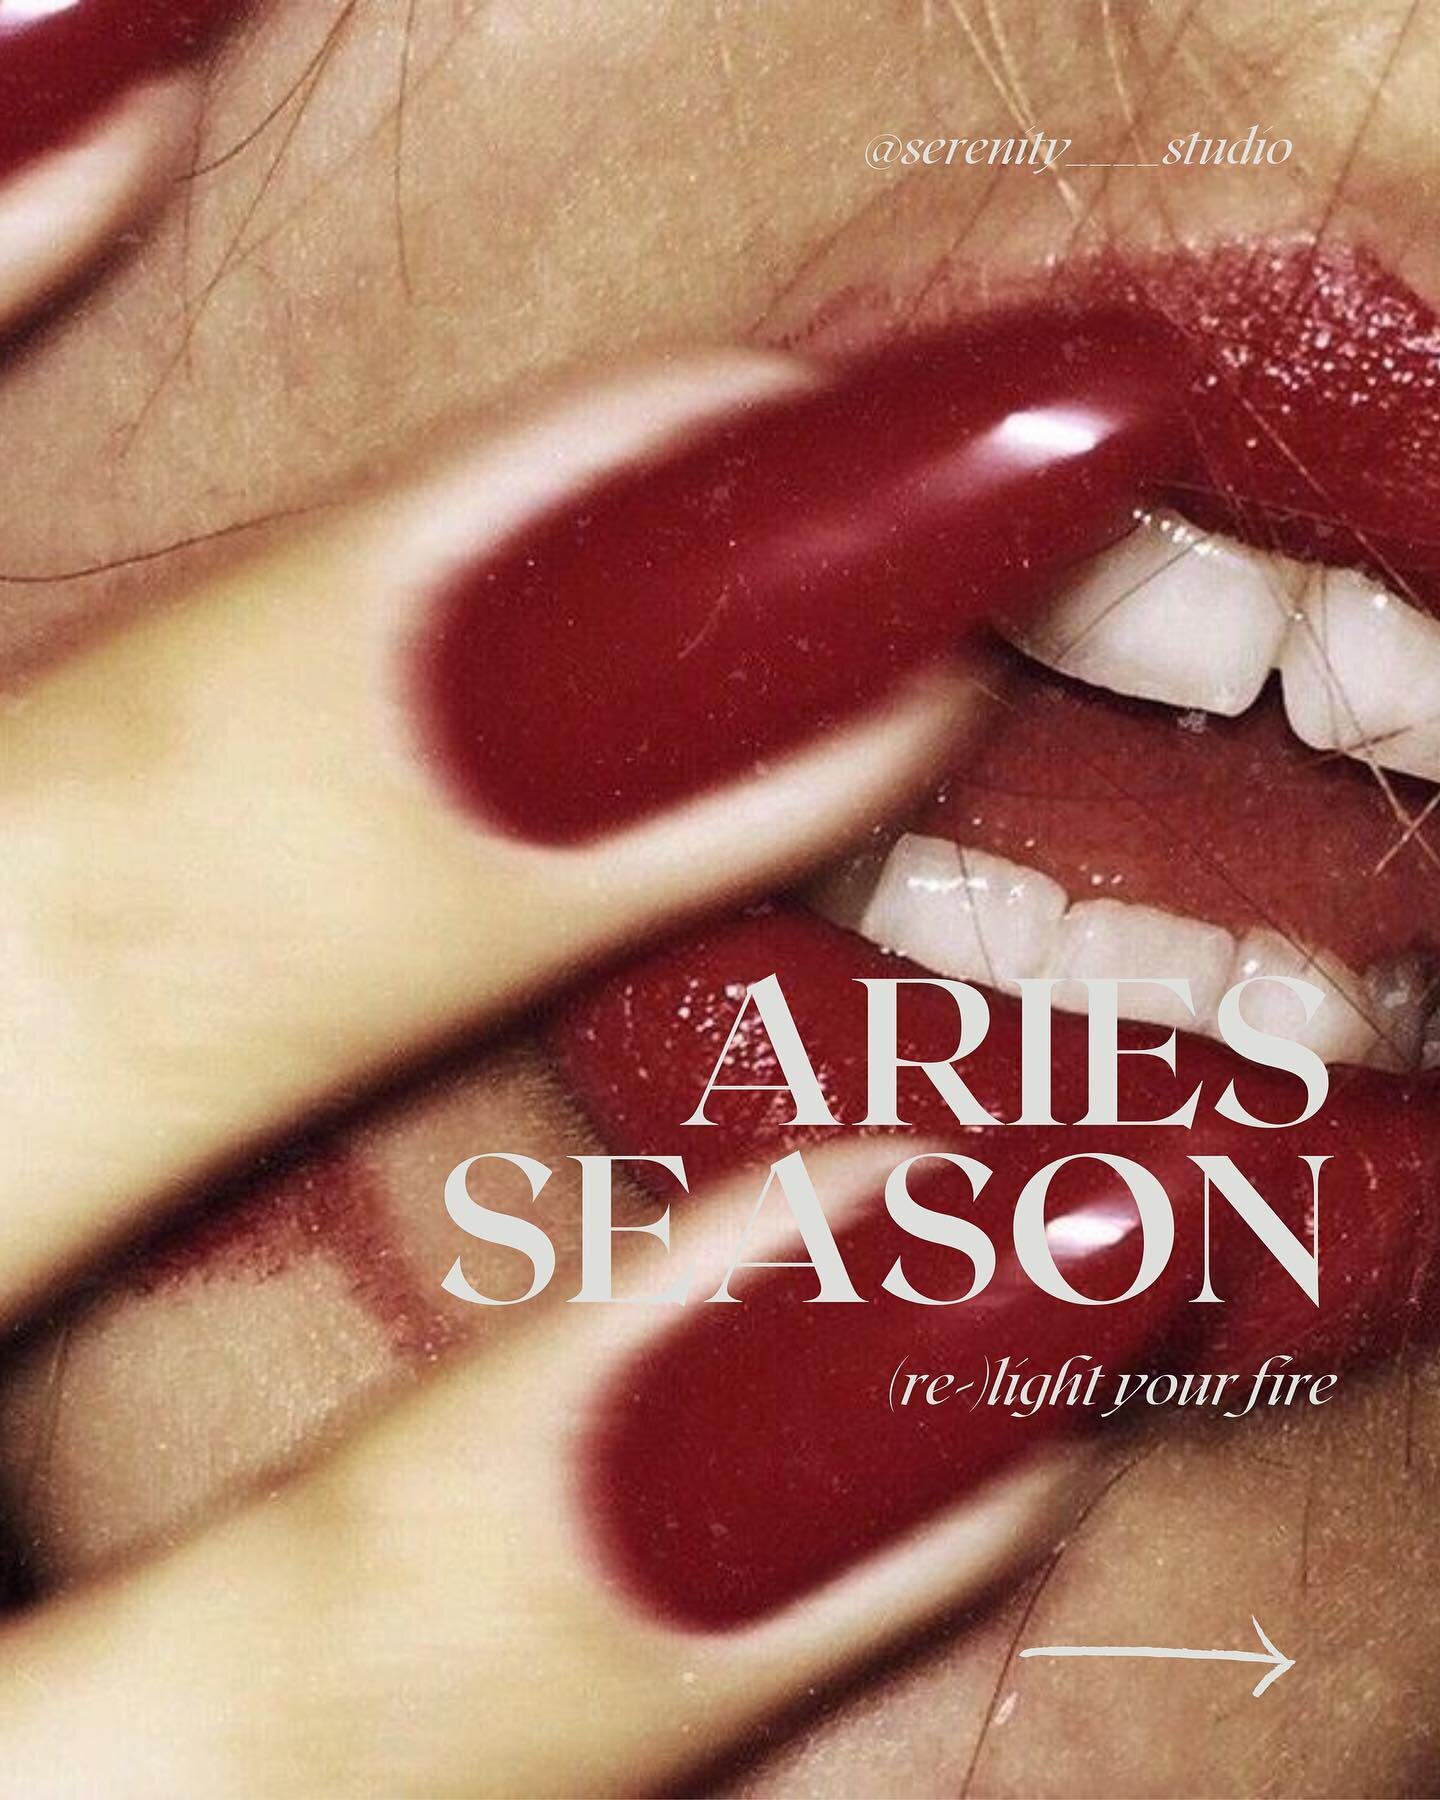 🔥 ready - set - go after your dreams: that&rsquo;s the energy of aries season 🔥

mit dem fr&uuml;hlingsbeginn sind wir in die strahlende aries season gestartet. 

time to let your soul and big dreams shine. welche projekte, visionen oder ziele woll